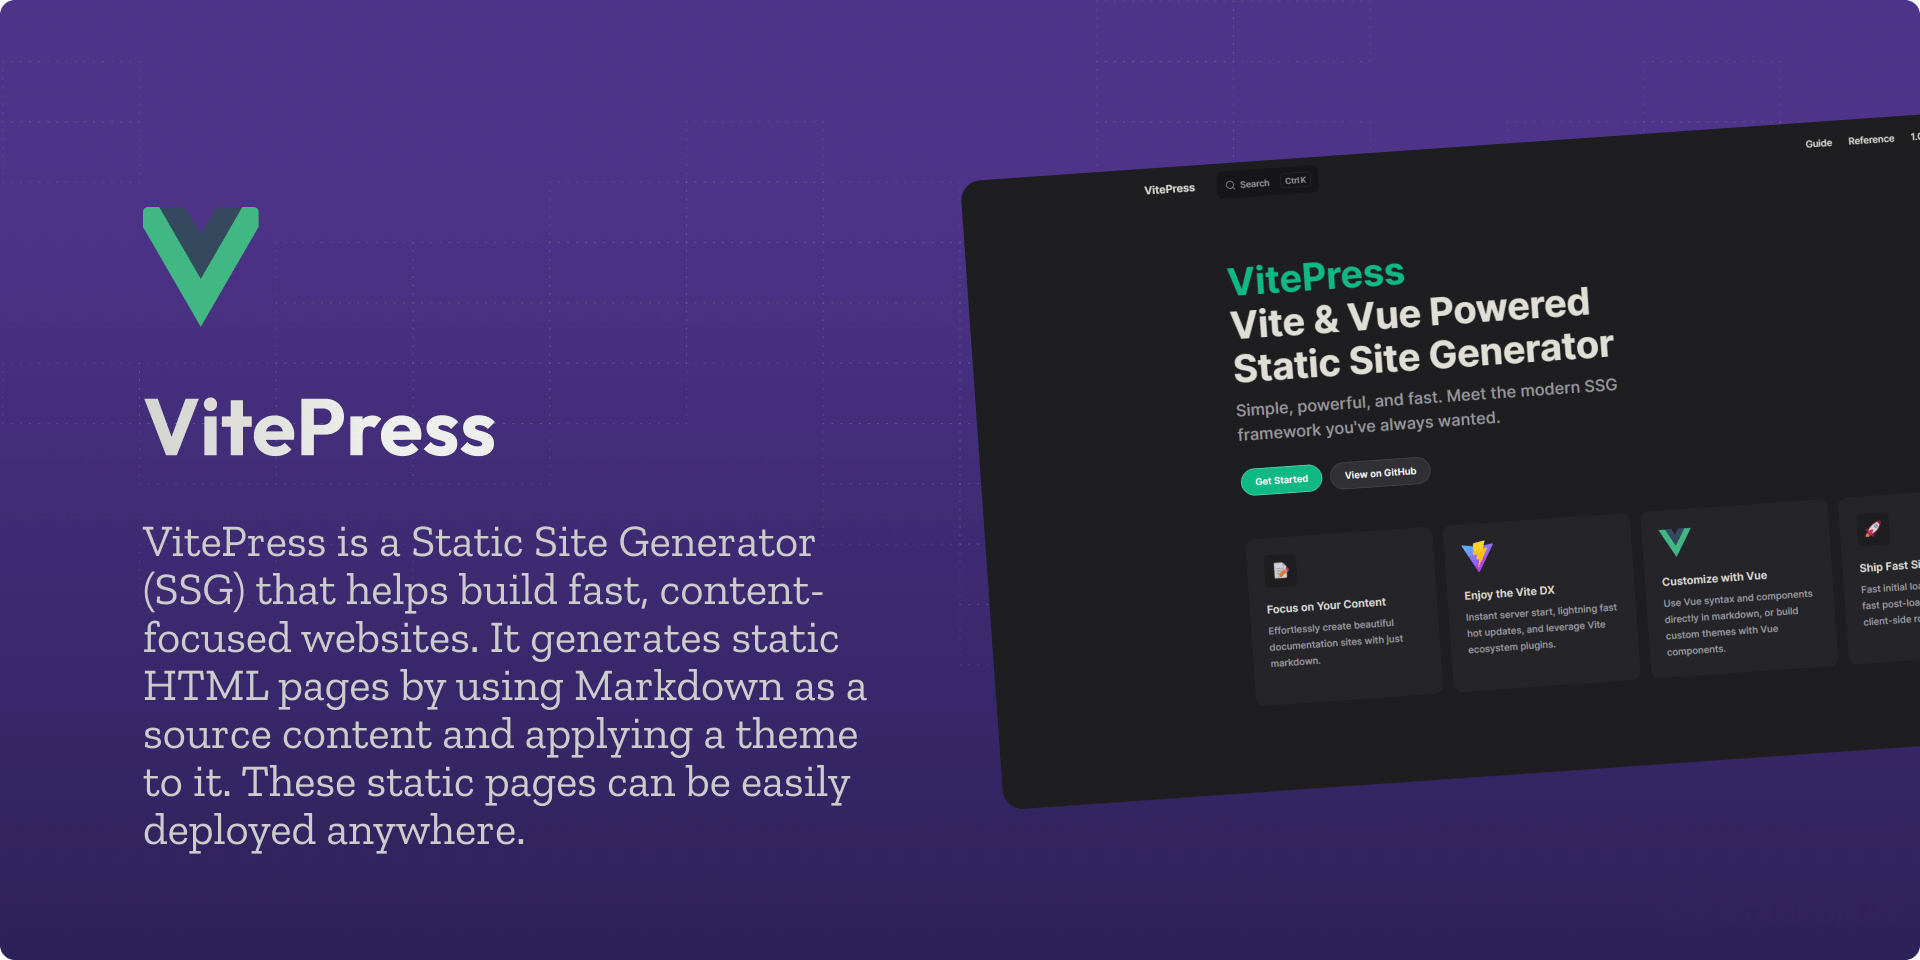 VitePress - Vite & Vue Powered Static Site Generator. Simple, powerful, and fast. Meet the modern SSG framework you've always wanted.